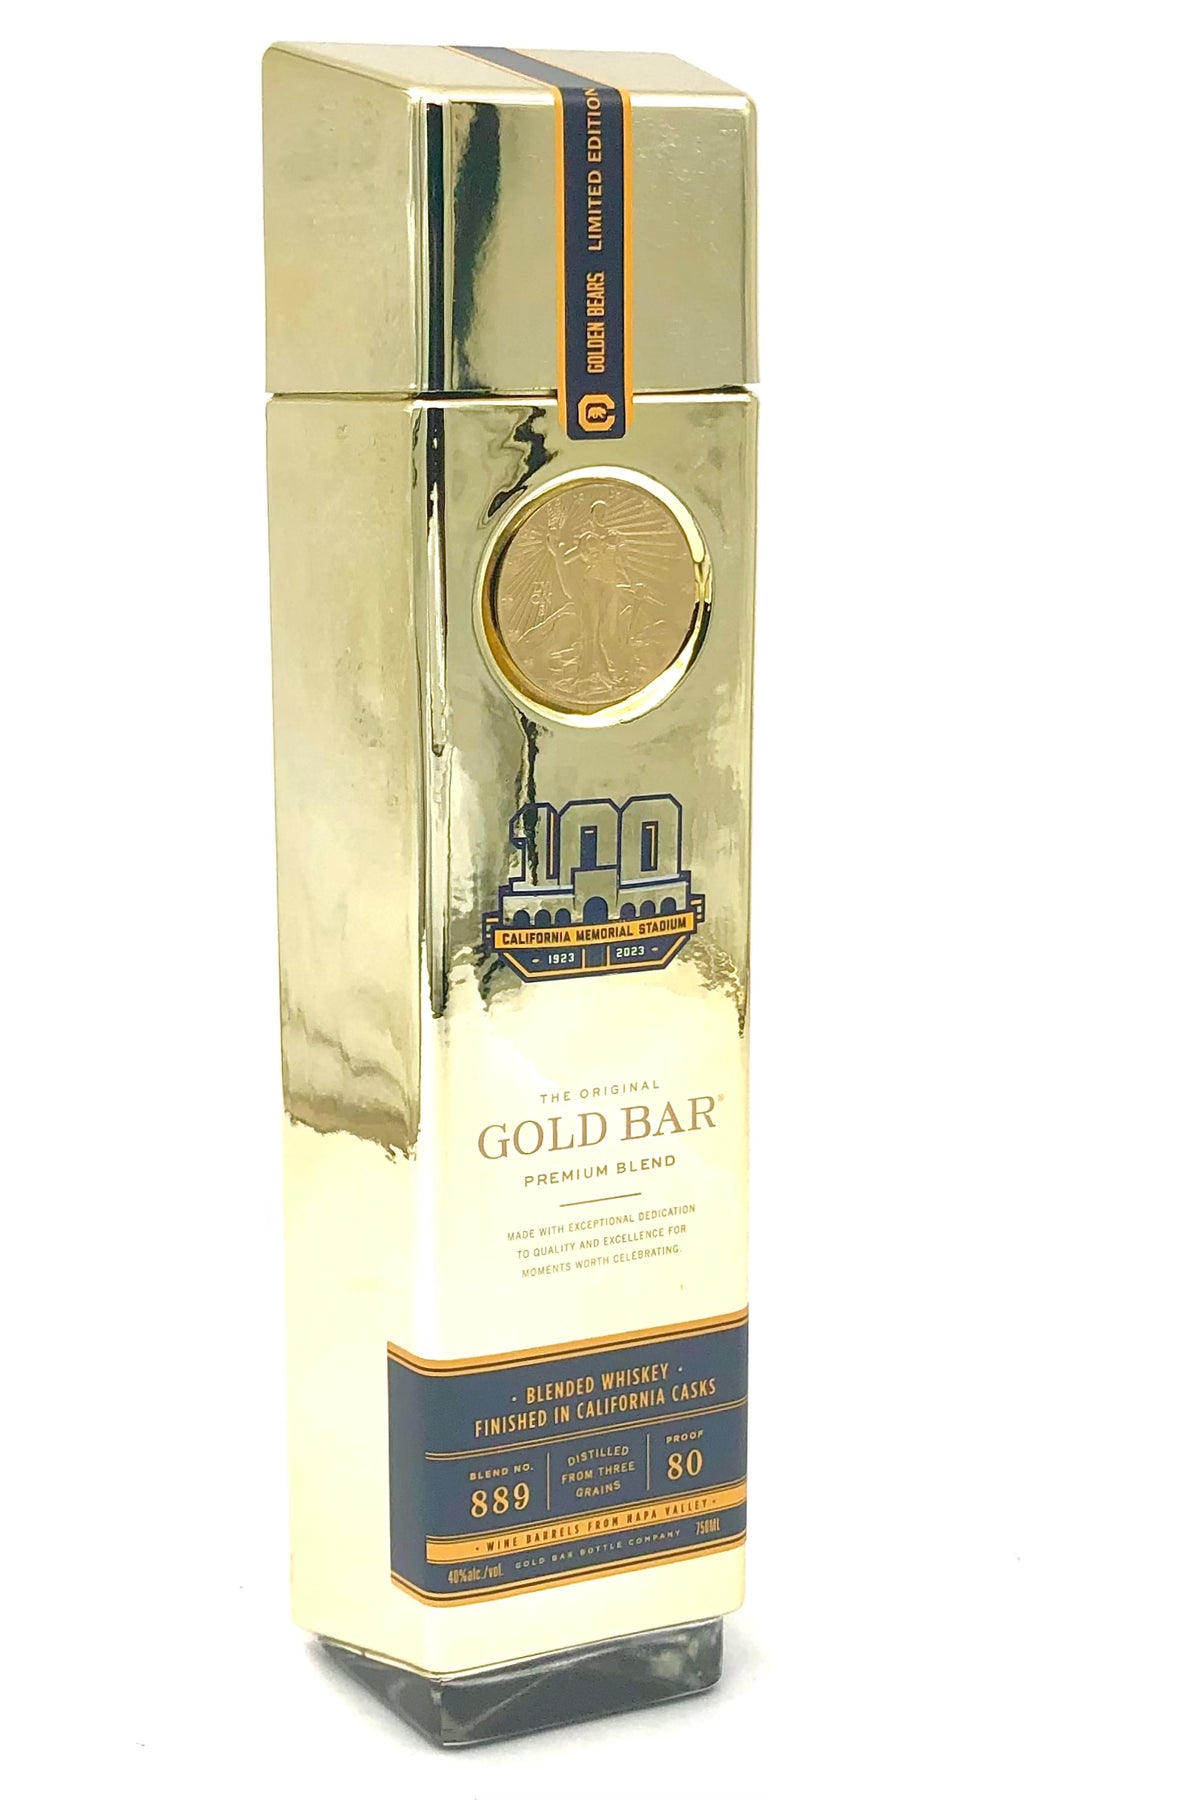 Cal Memorial Stadium Gold Bar 100th Anniversary American Whiskey Limited Edition